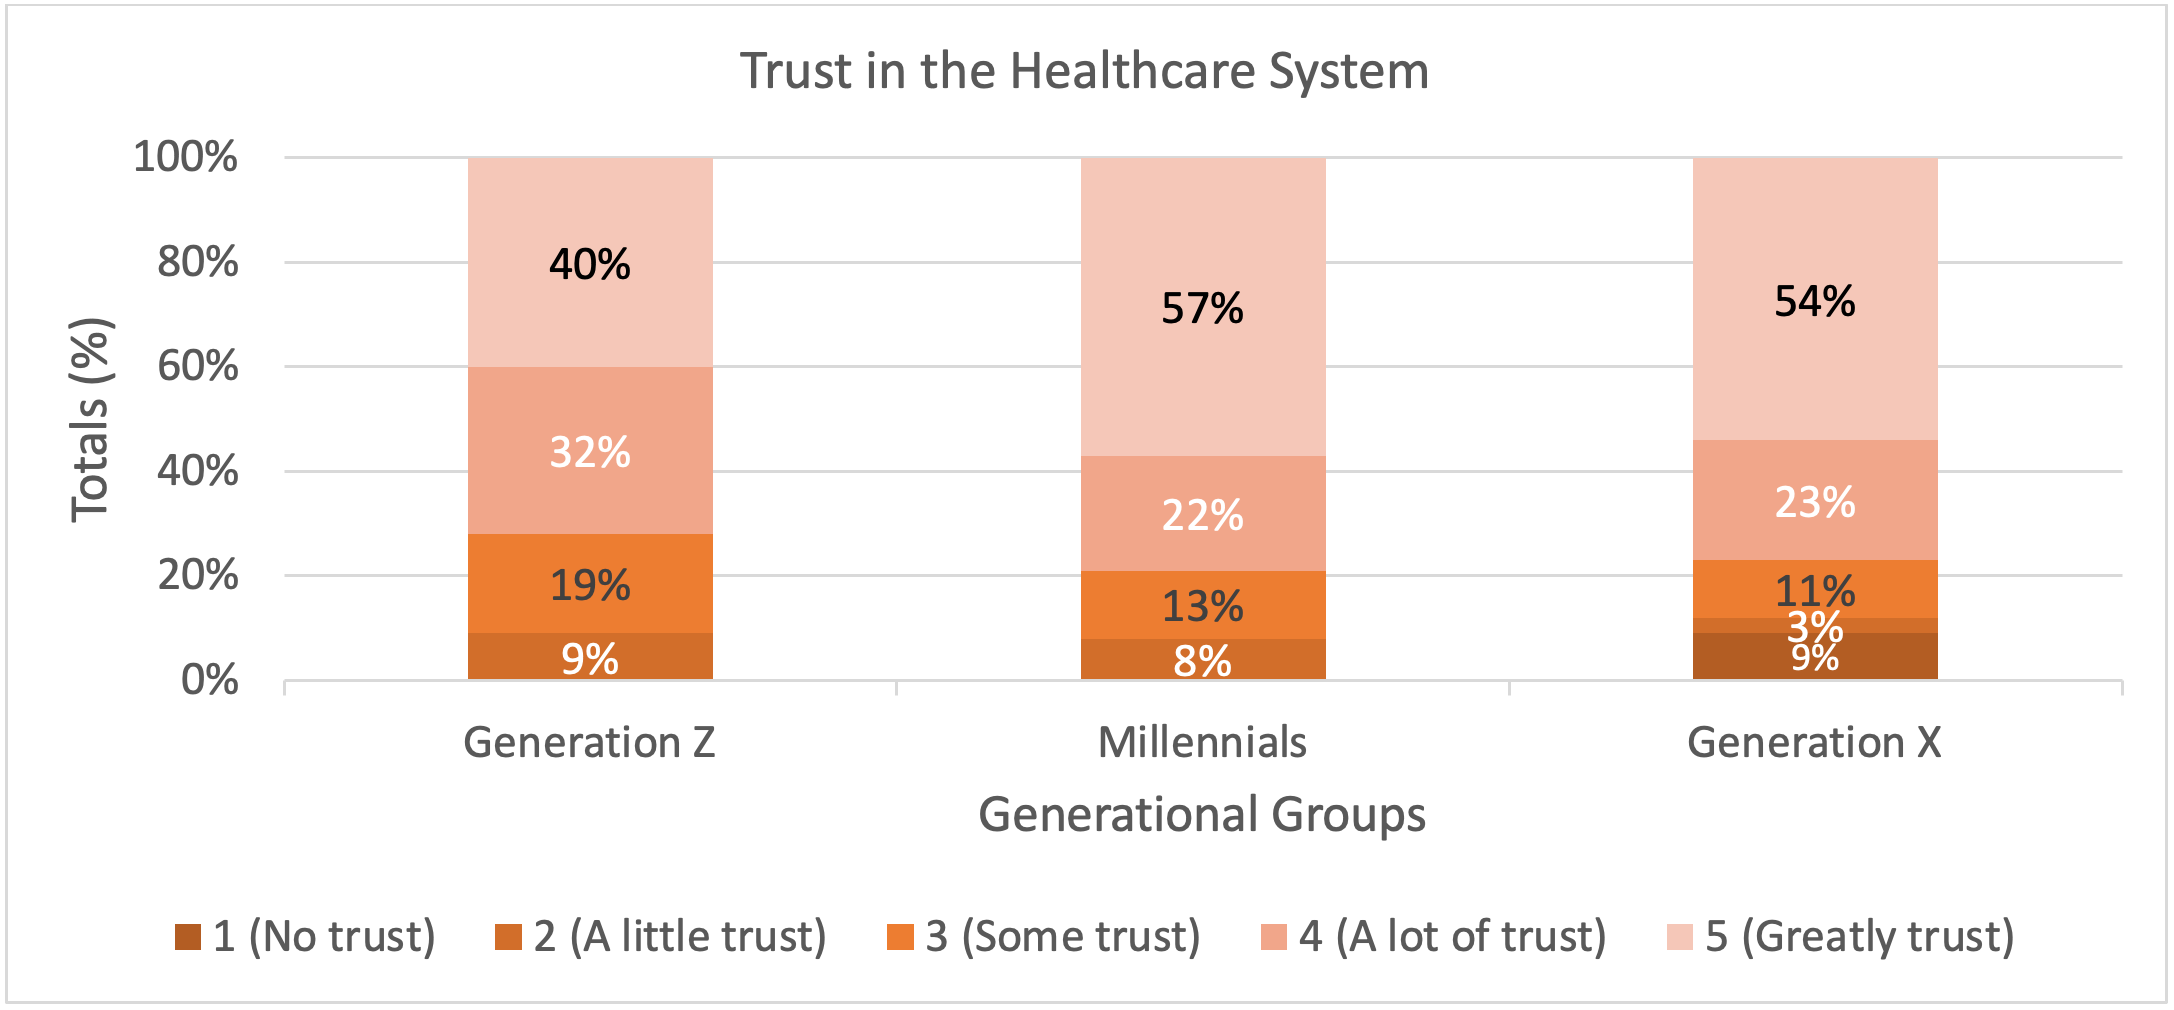 Table 4. Trust in the Healthcare System